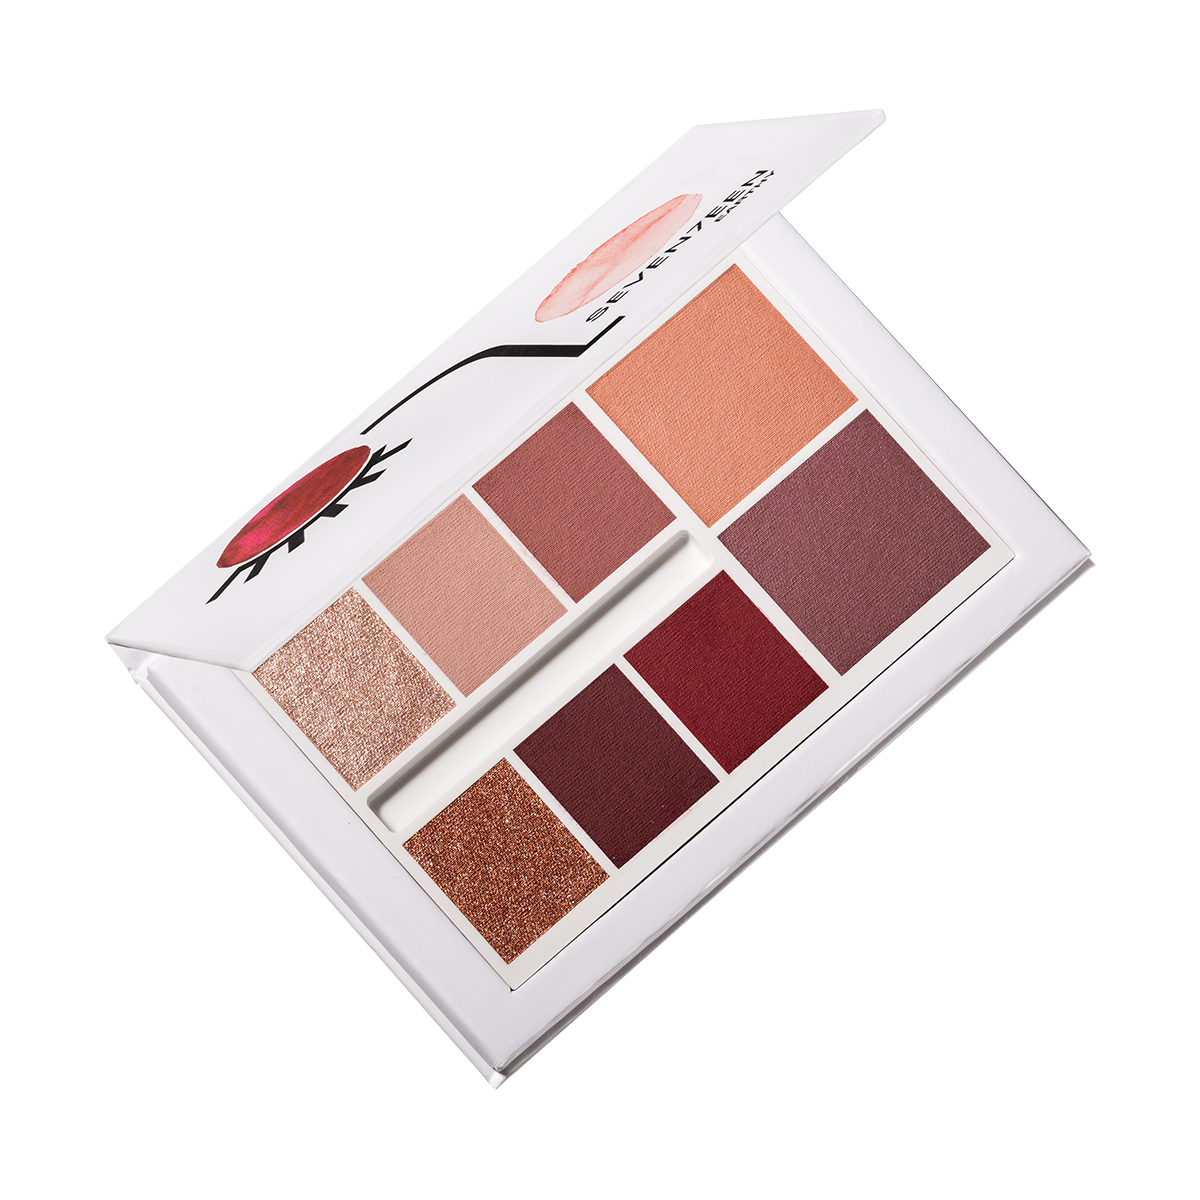 Limited edition total look palette in cherry and plum shades